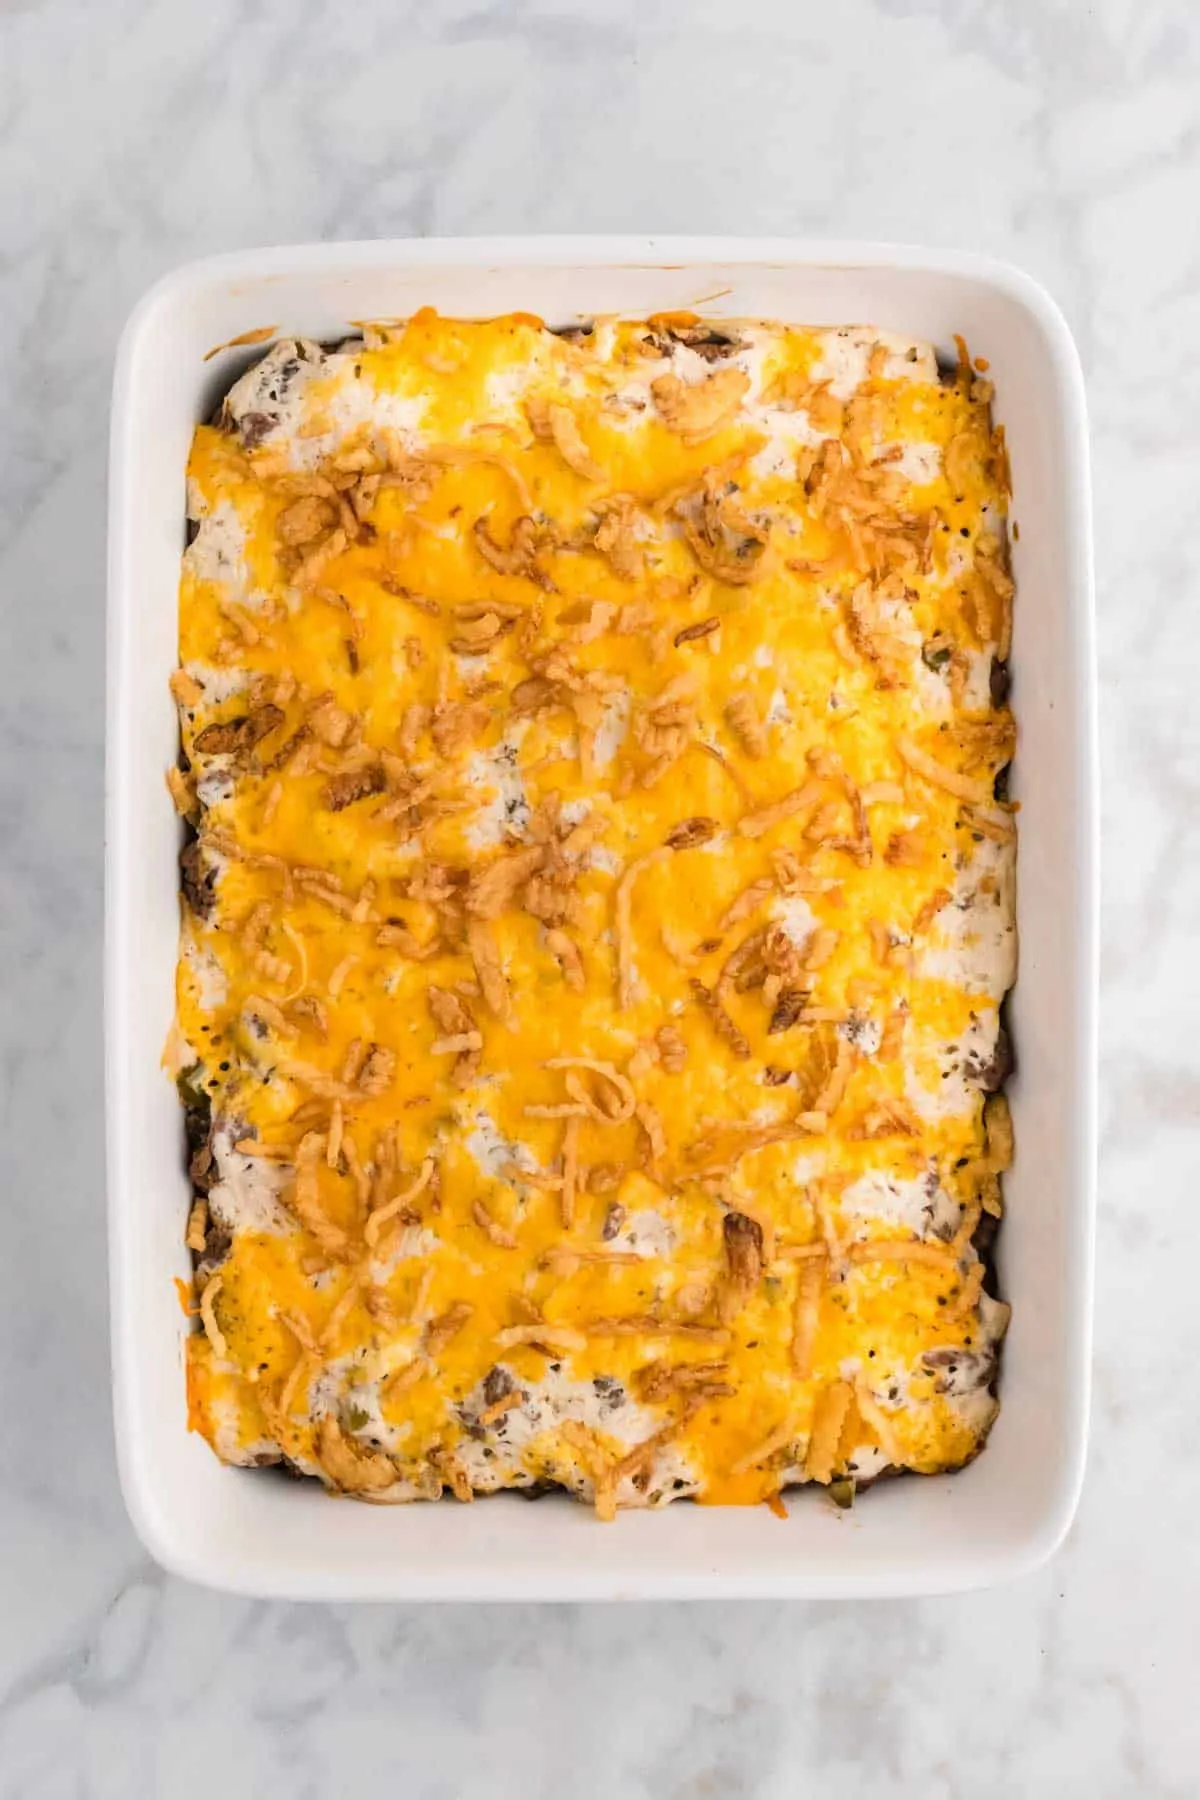 Hobo Casserole is a layered ground beef and sliced potato casserole loaded with diced bell peppers, onions, sour cream, cream of mushroom soup, cheddar cheese and French's crispy fried onions.